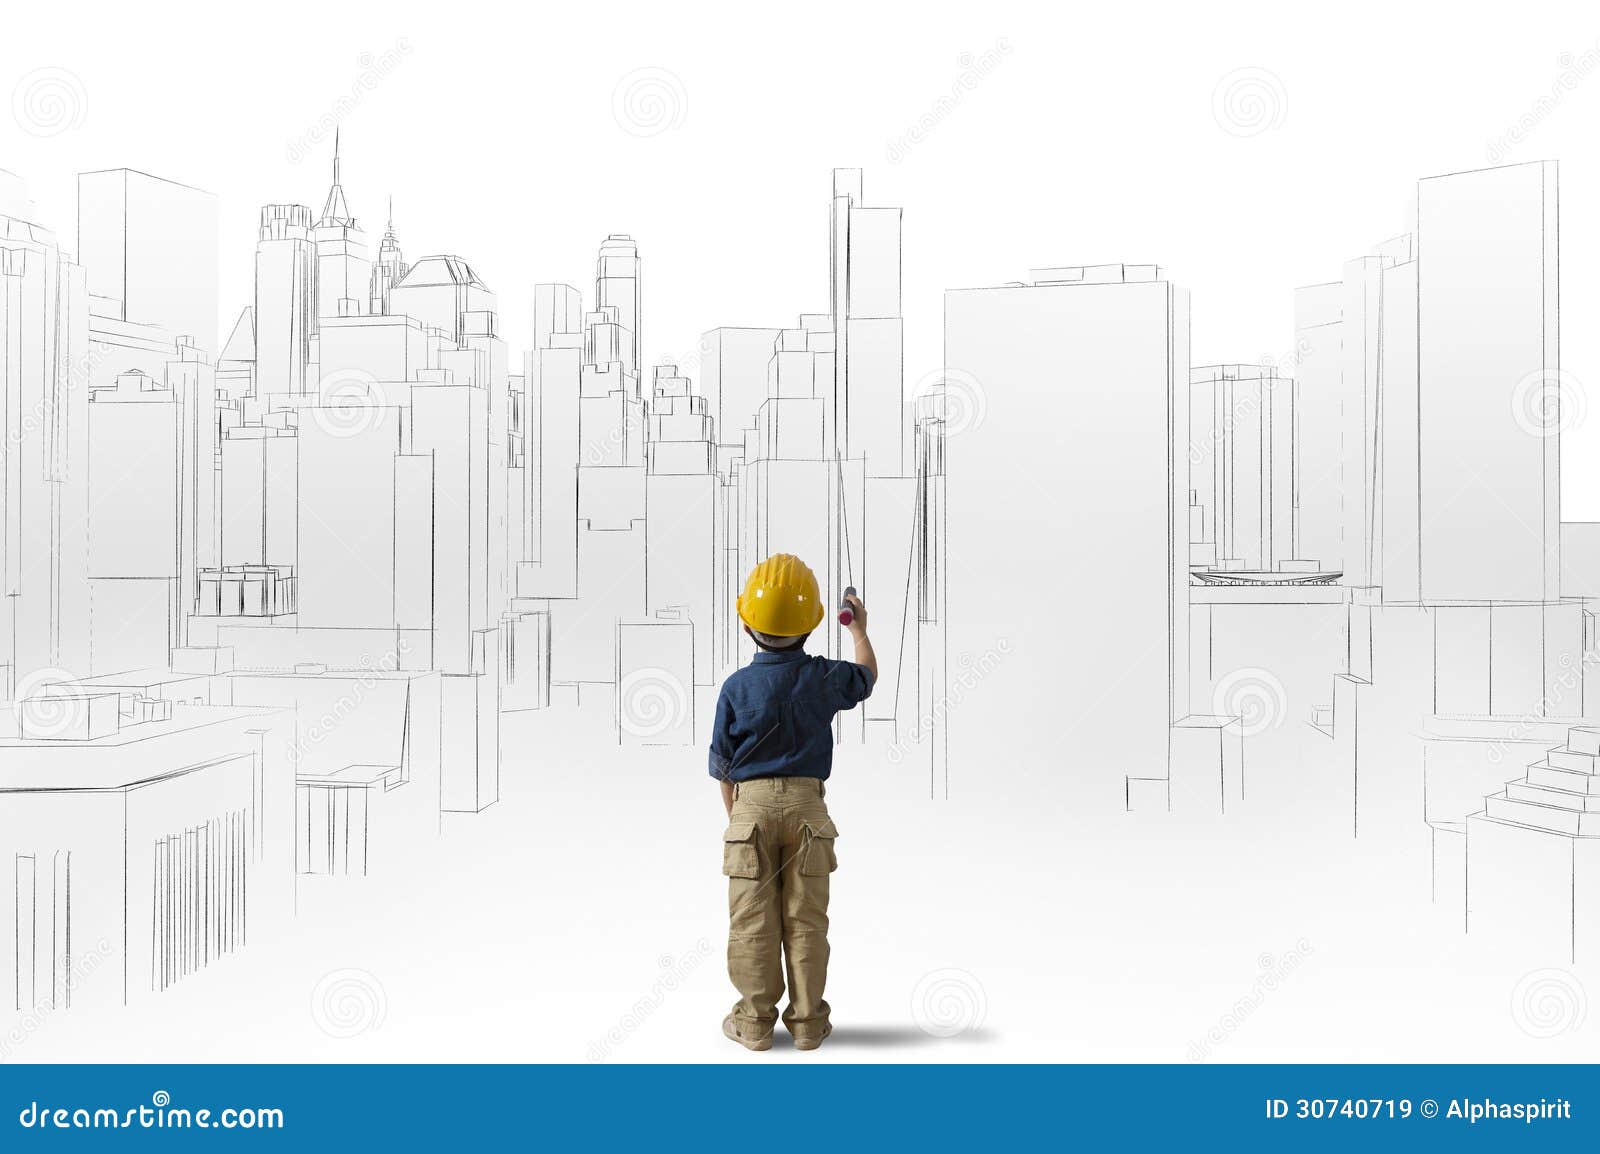 ambition of a young architect